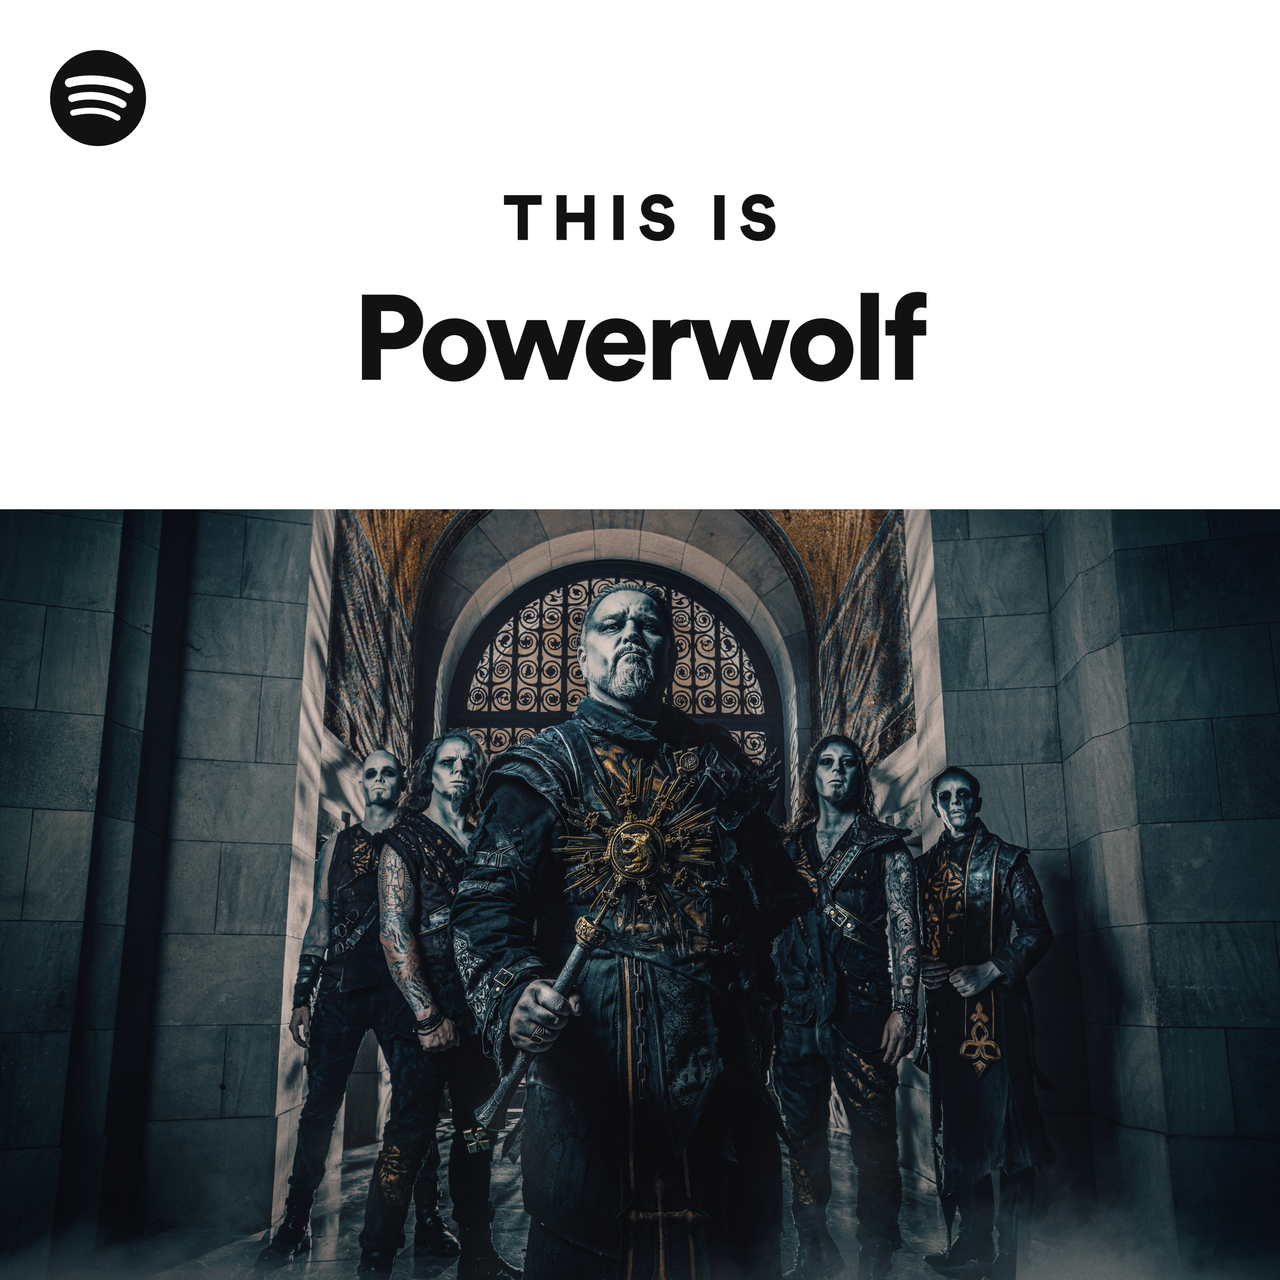 This Is Powerwolf